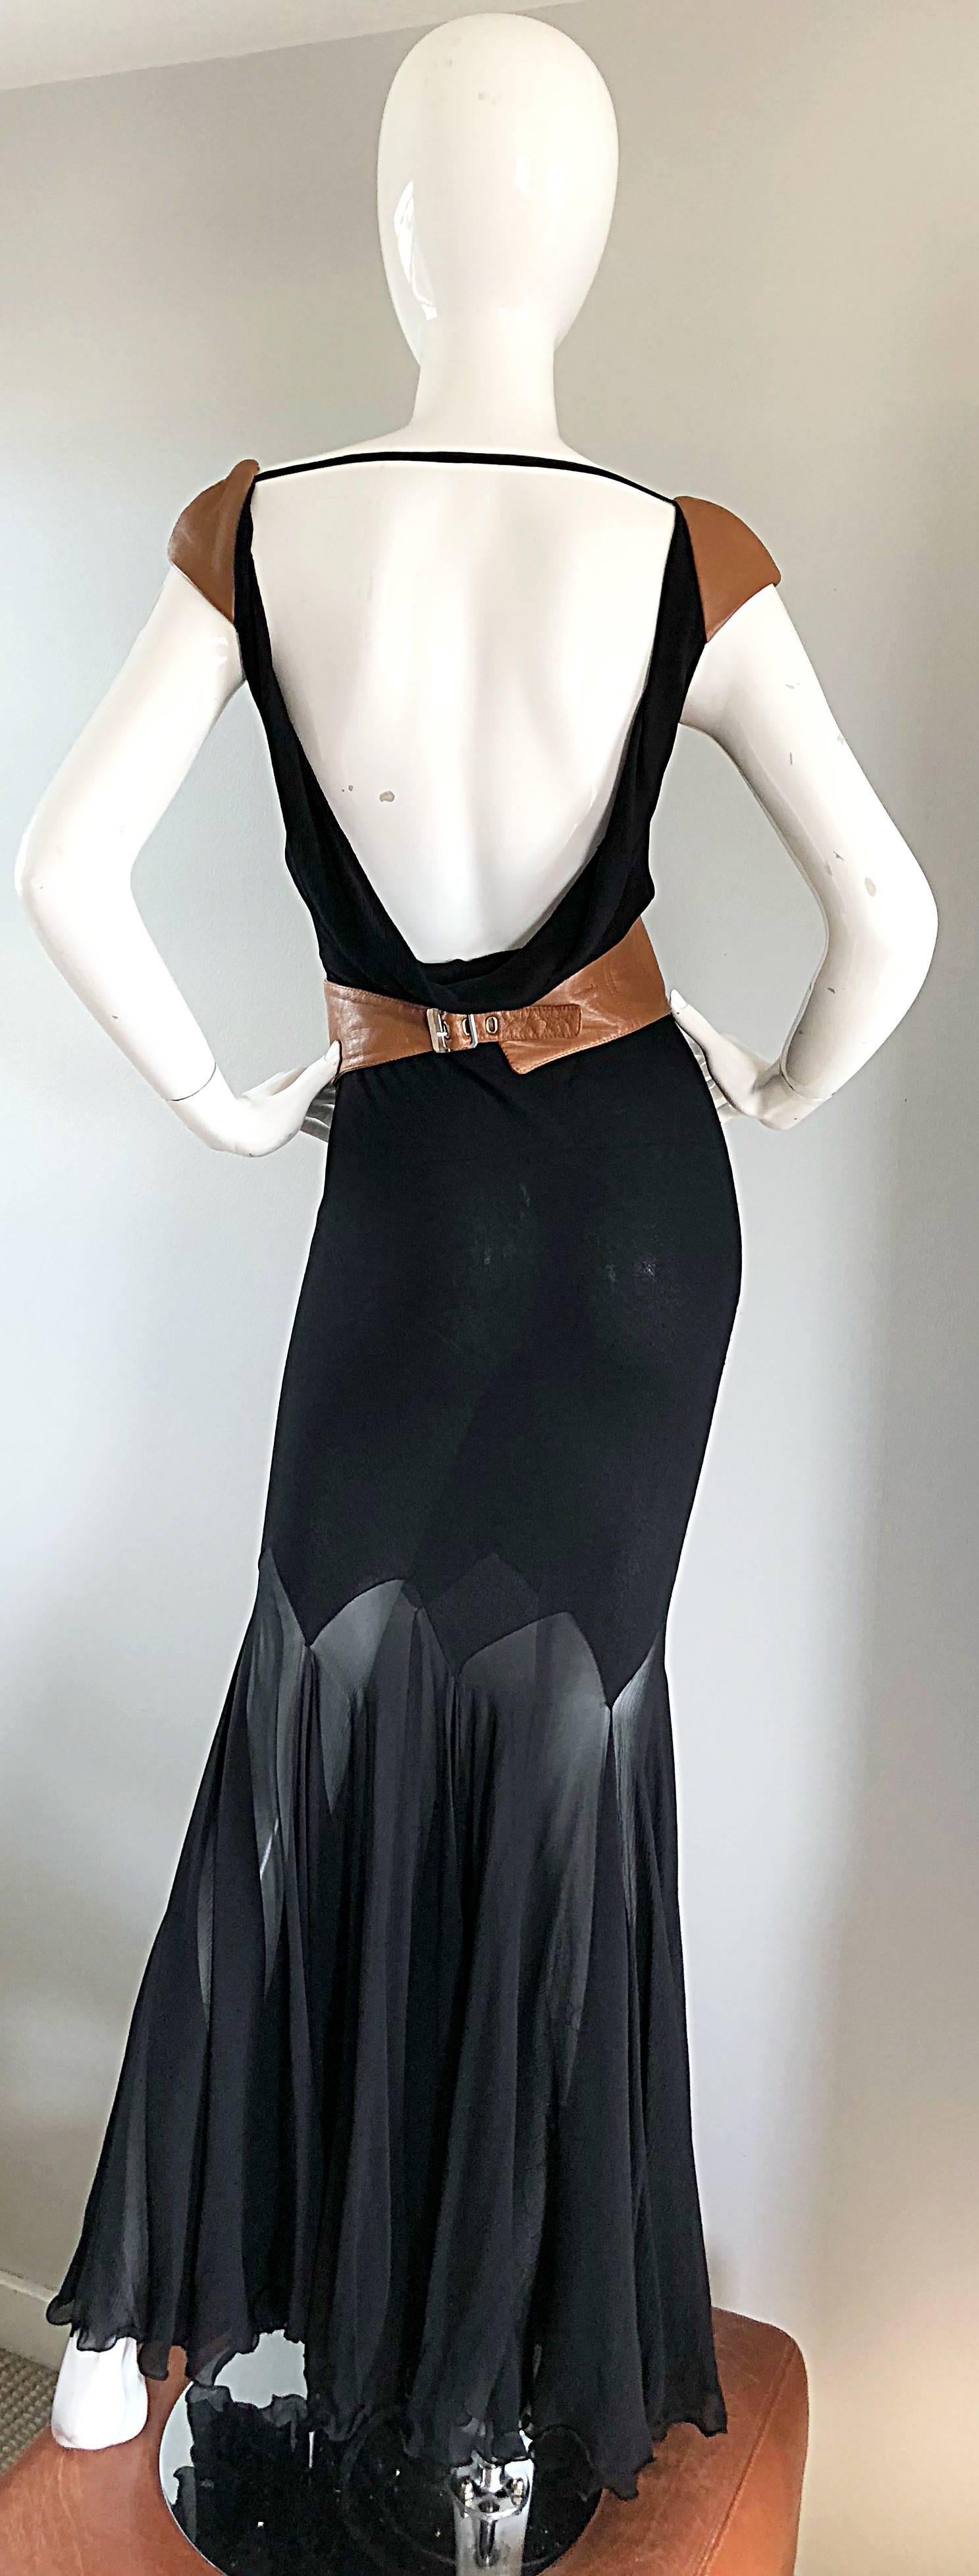 Gianni Versace Couture Fall 2001 Black Silk Chiffon Tan Leather Belted Gown For Sale 1